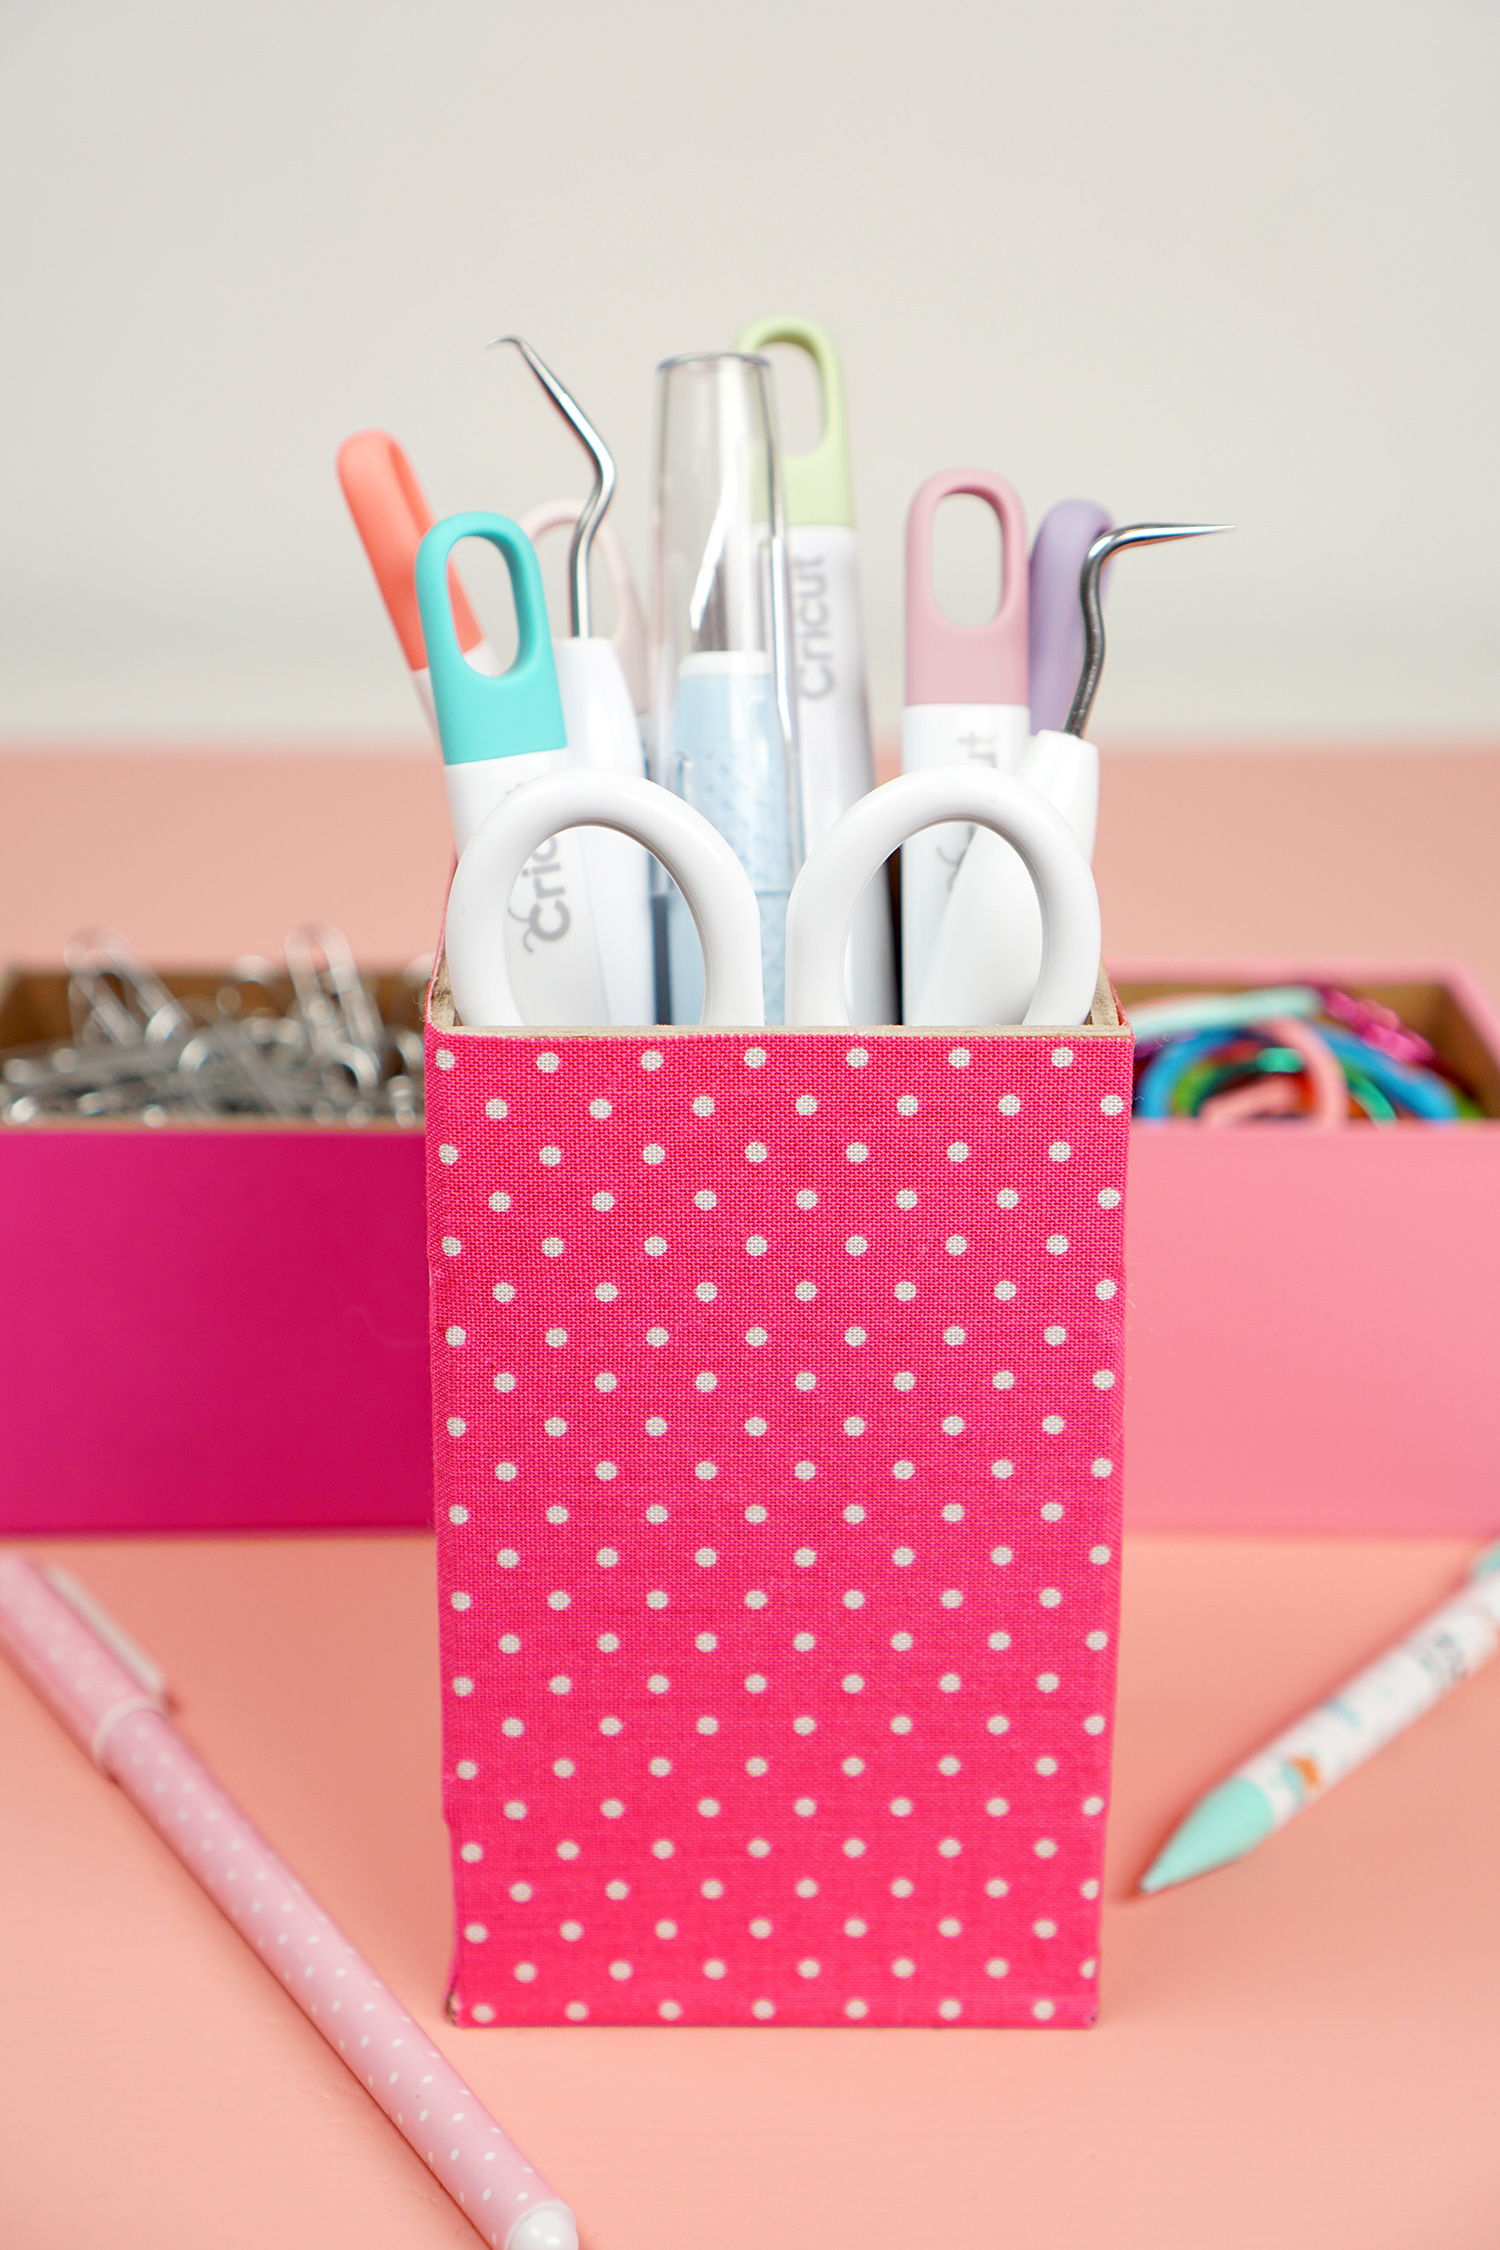 cute pink polka dot desk organizer with tools